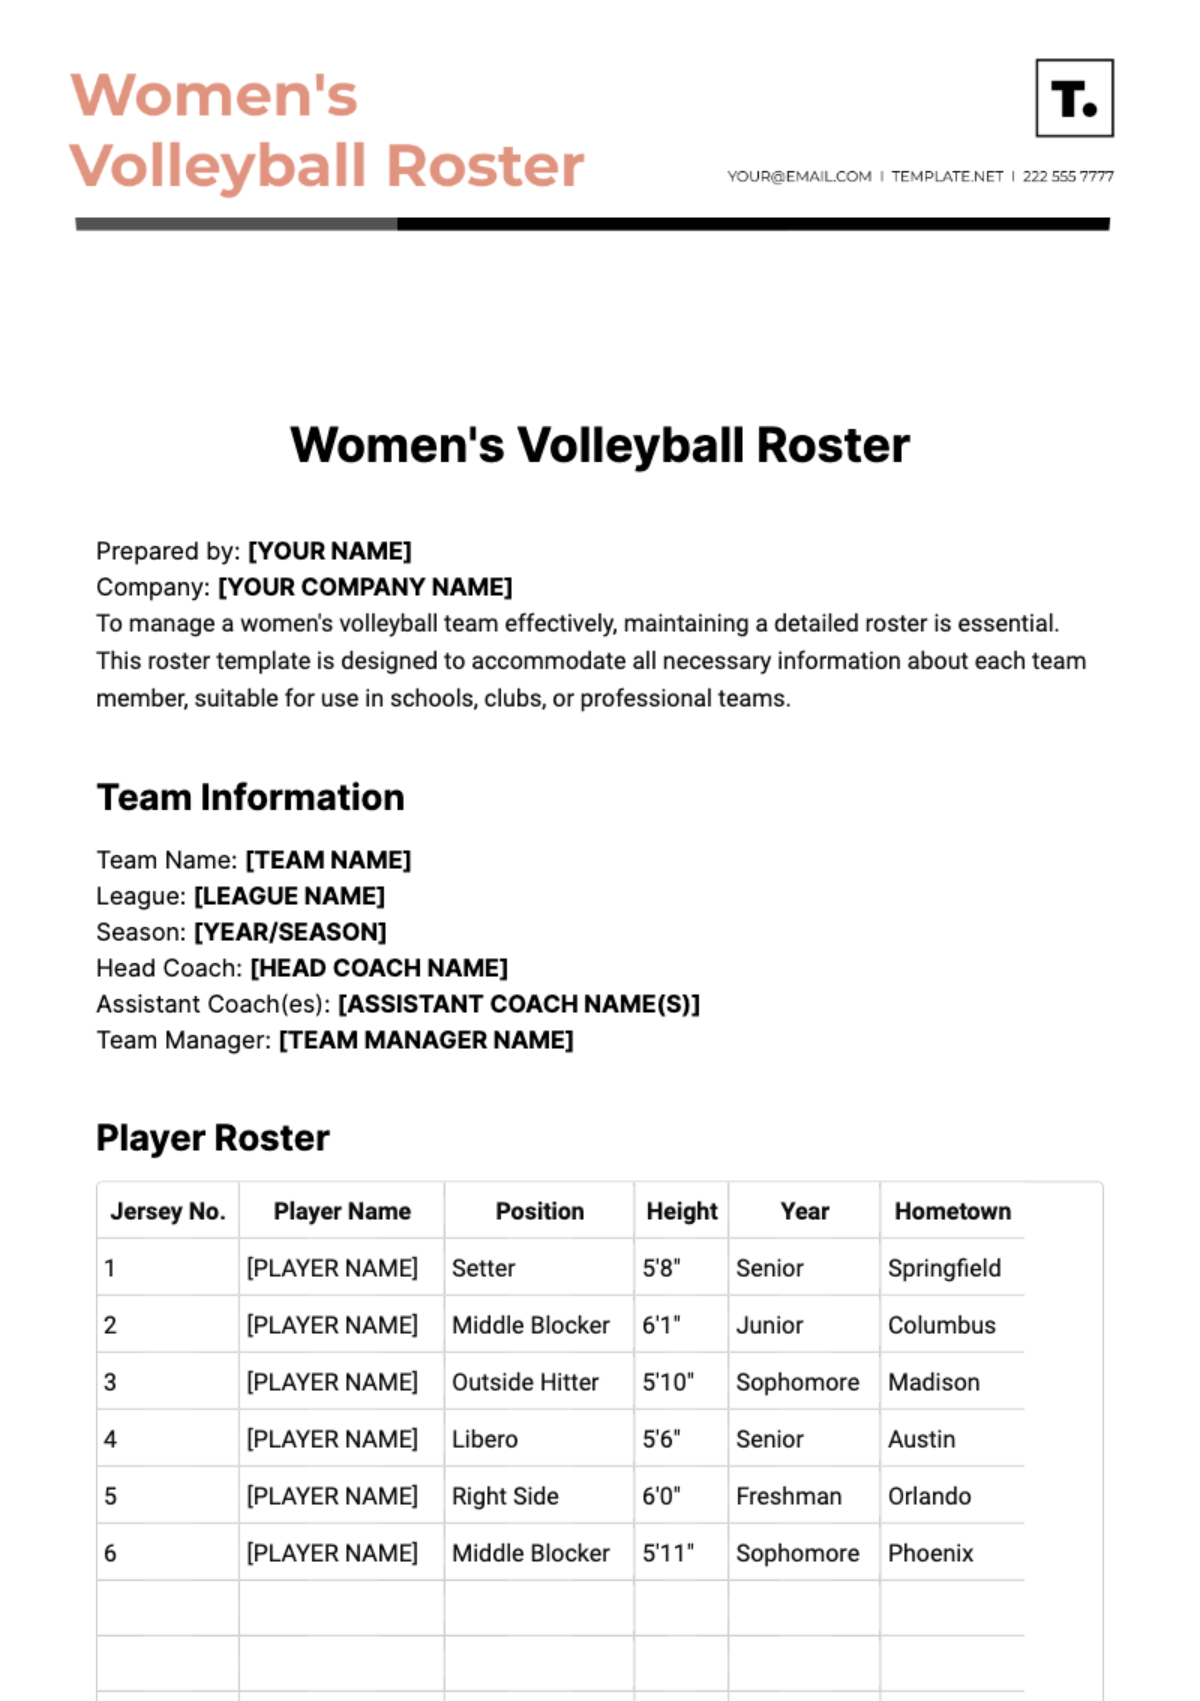 Women's Volleyball Roster Template